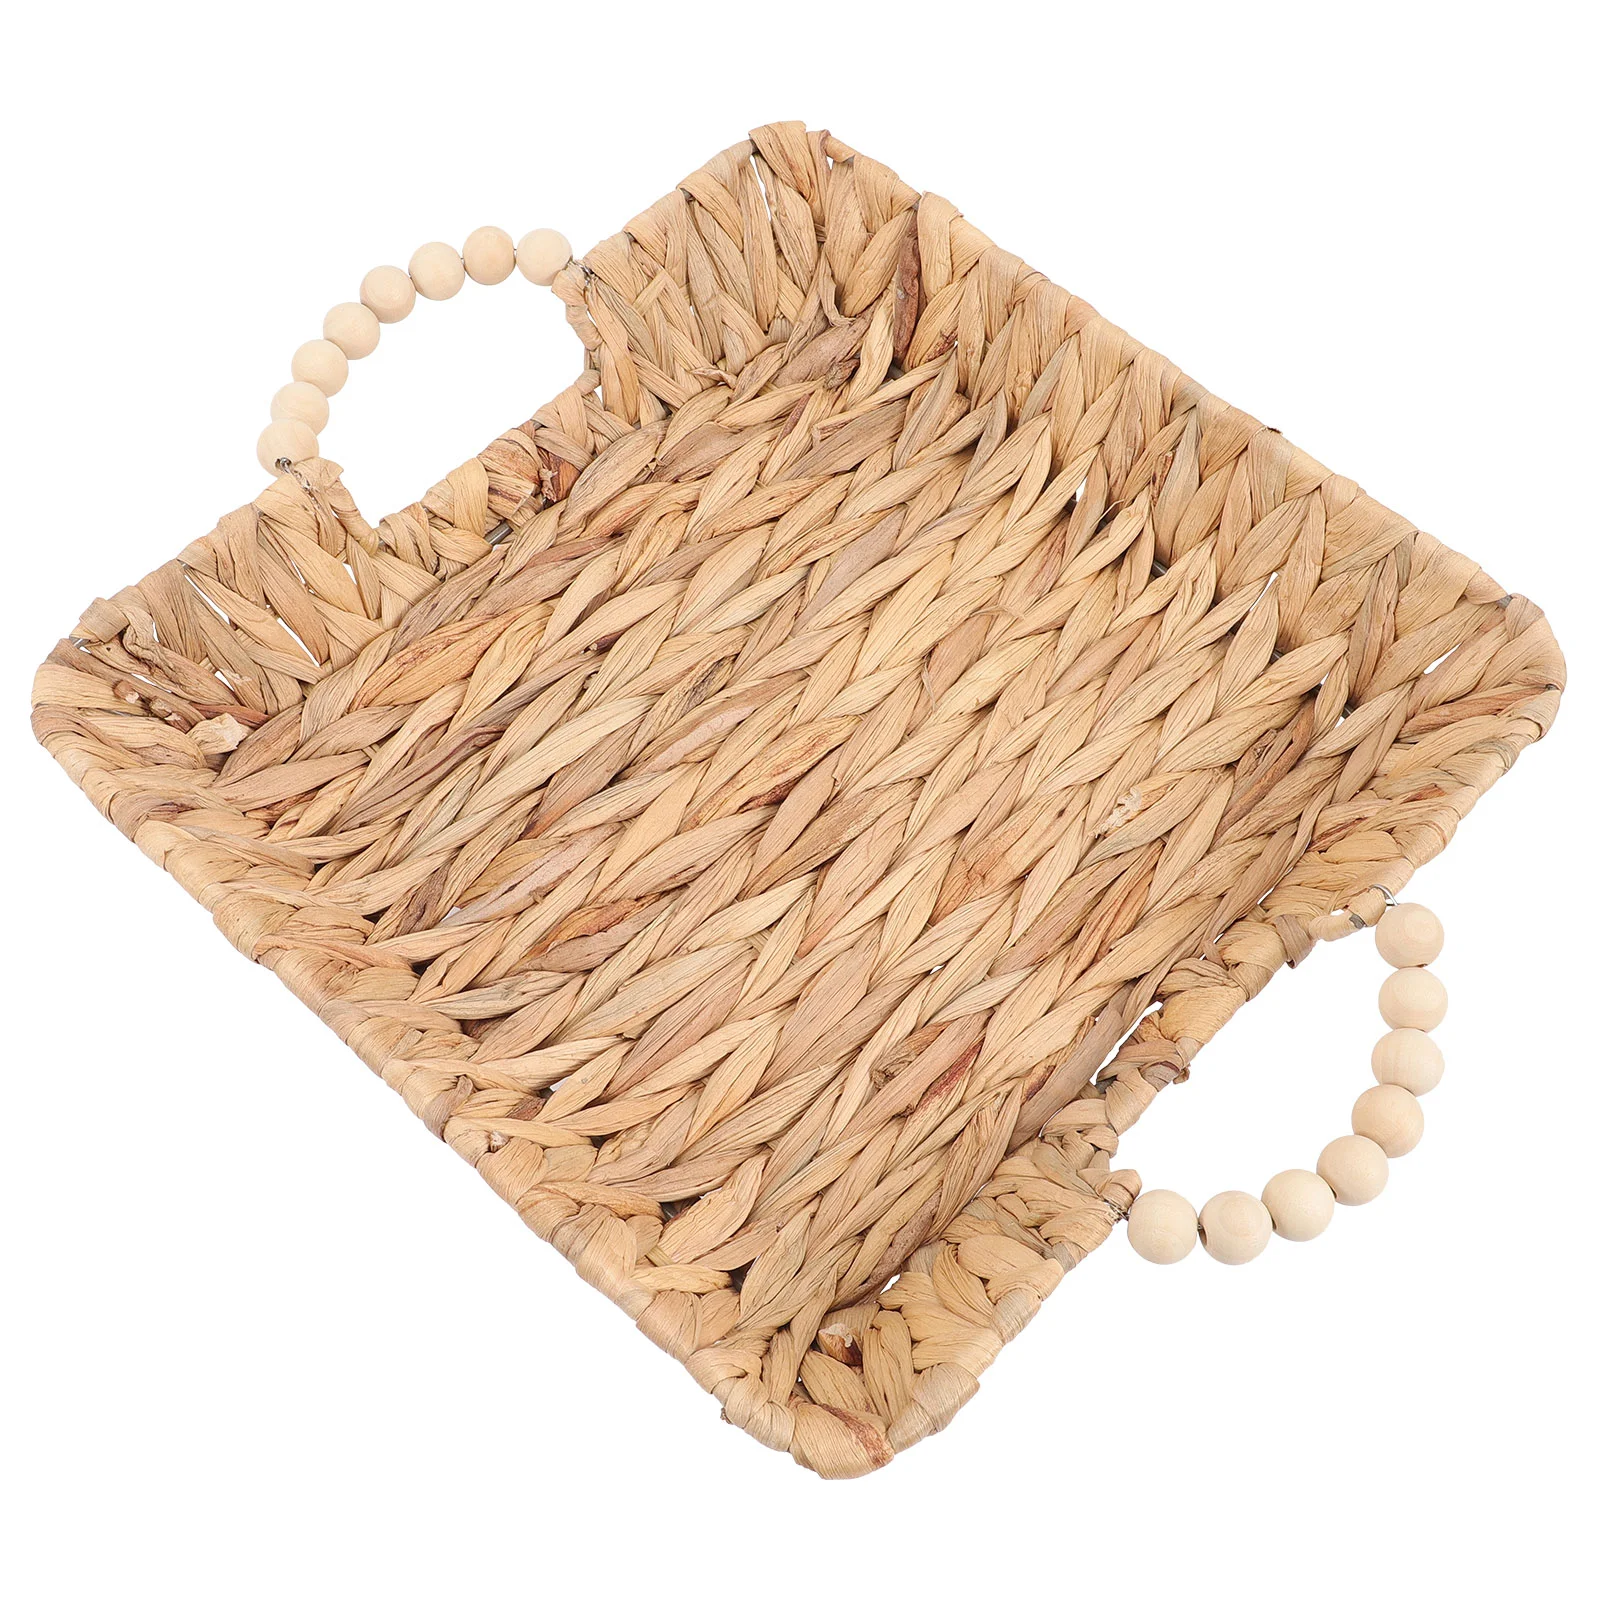 

Basket Tray Storage Woven Seagrass Baskets Organizer Tool Boss Bucket Handles Square Jewelry Wallet Entryway Key Fork Tableware